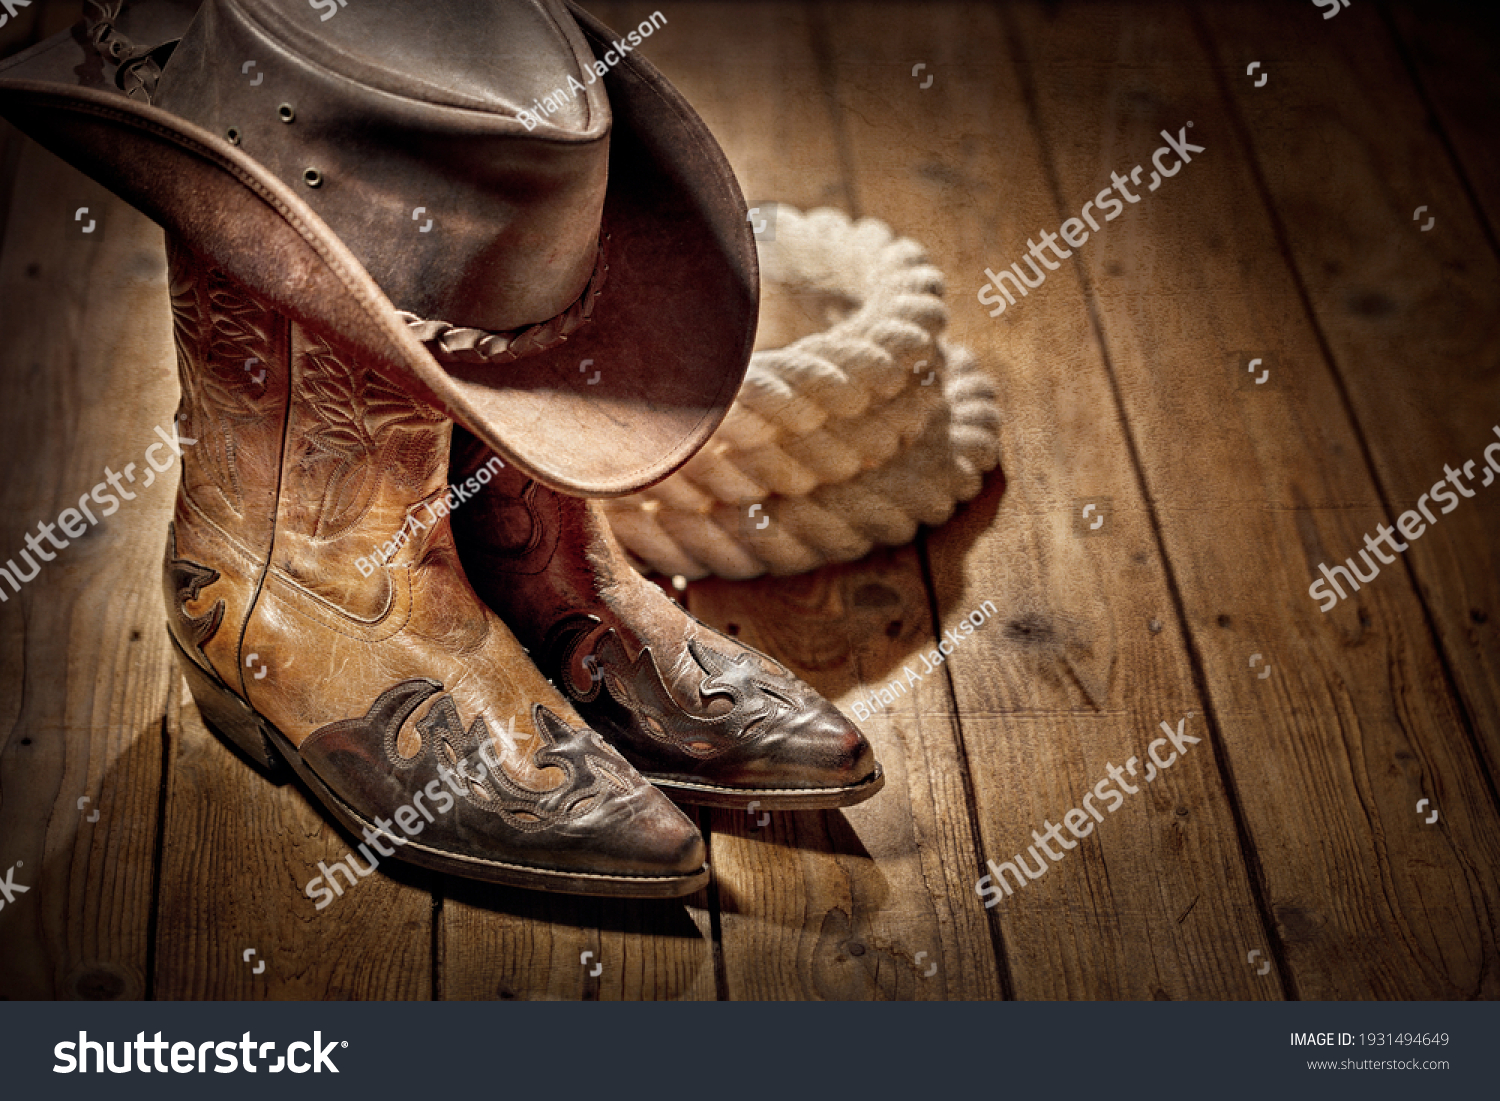 Country music festival live concert or rodeo with cowboy hat and boots background #1931494649